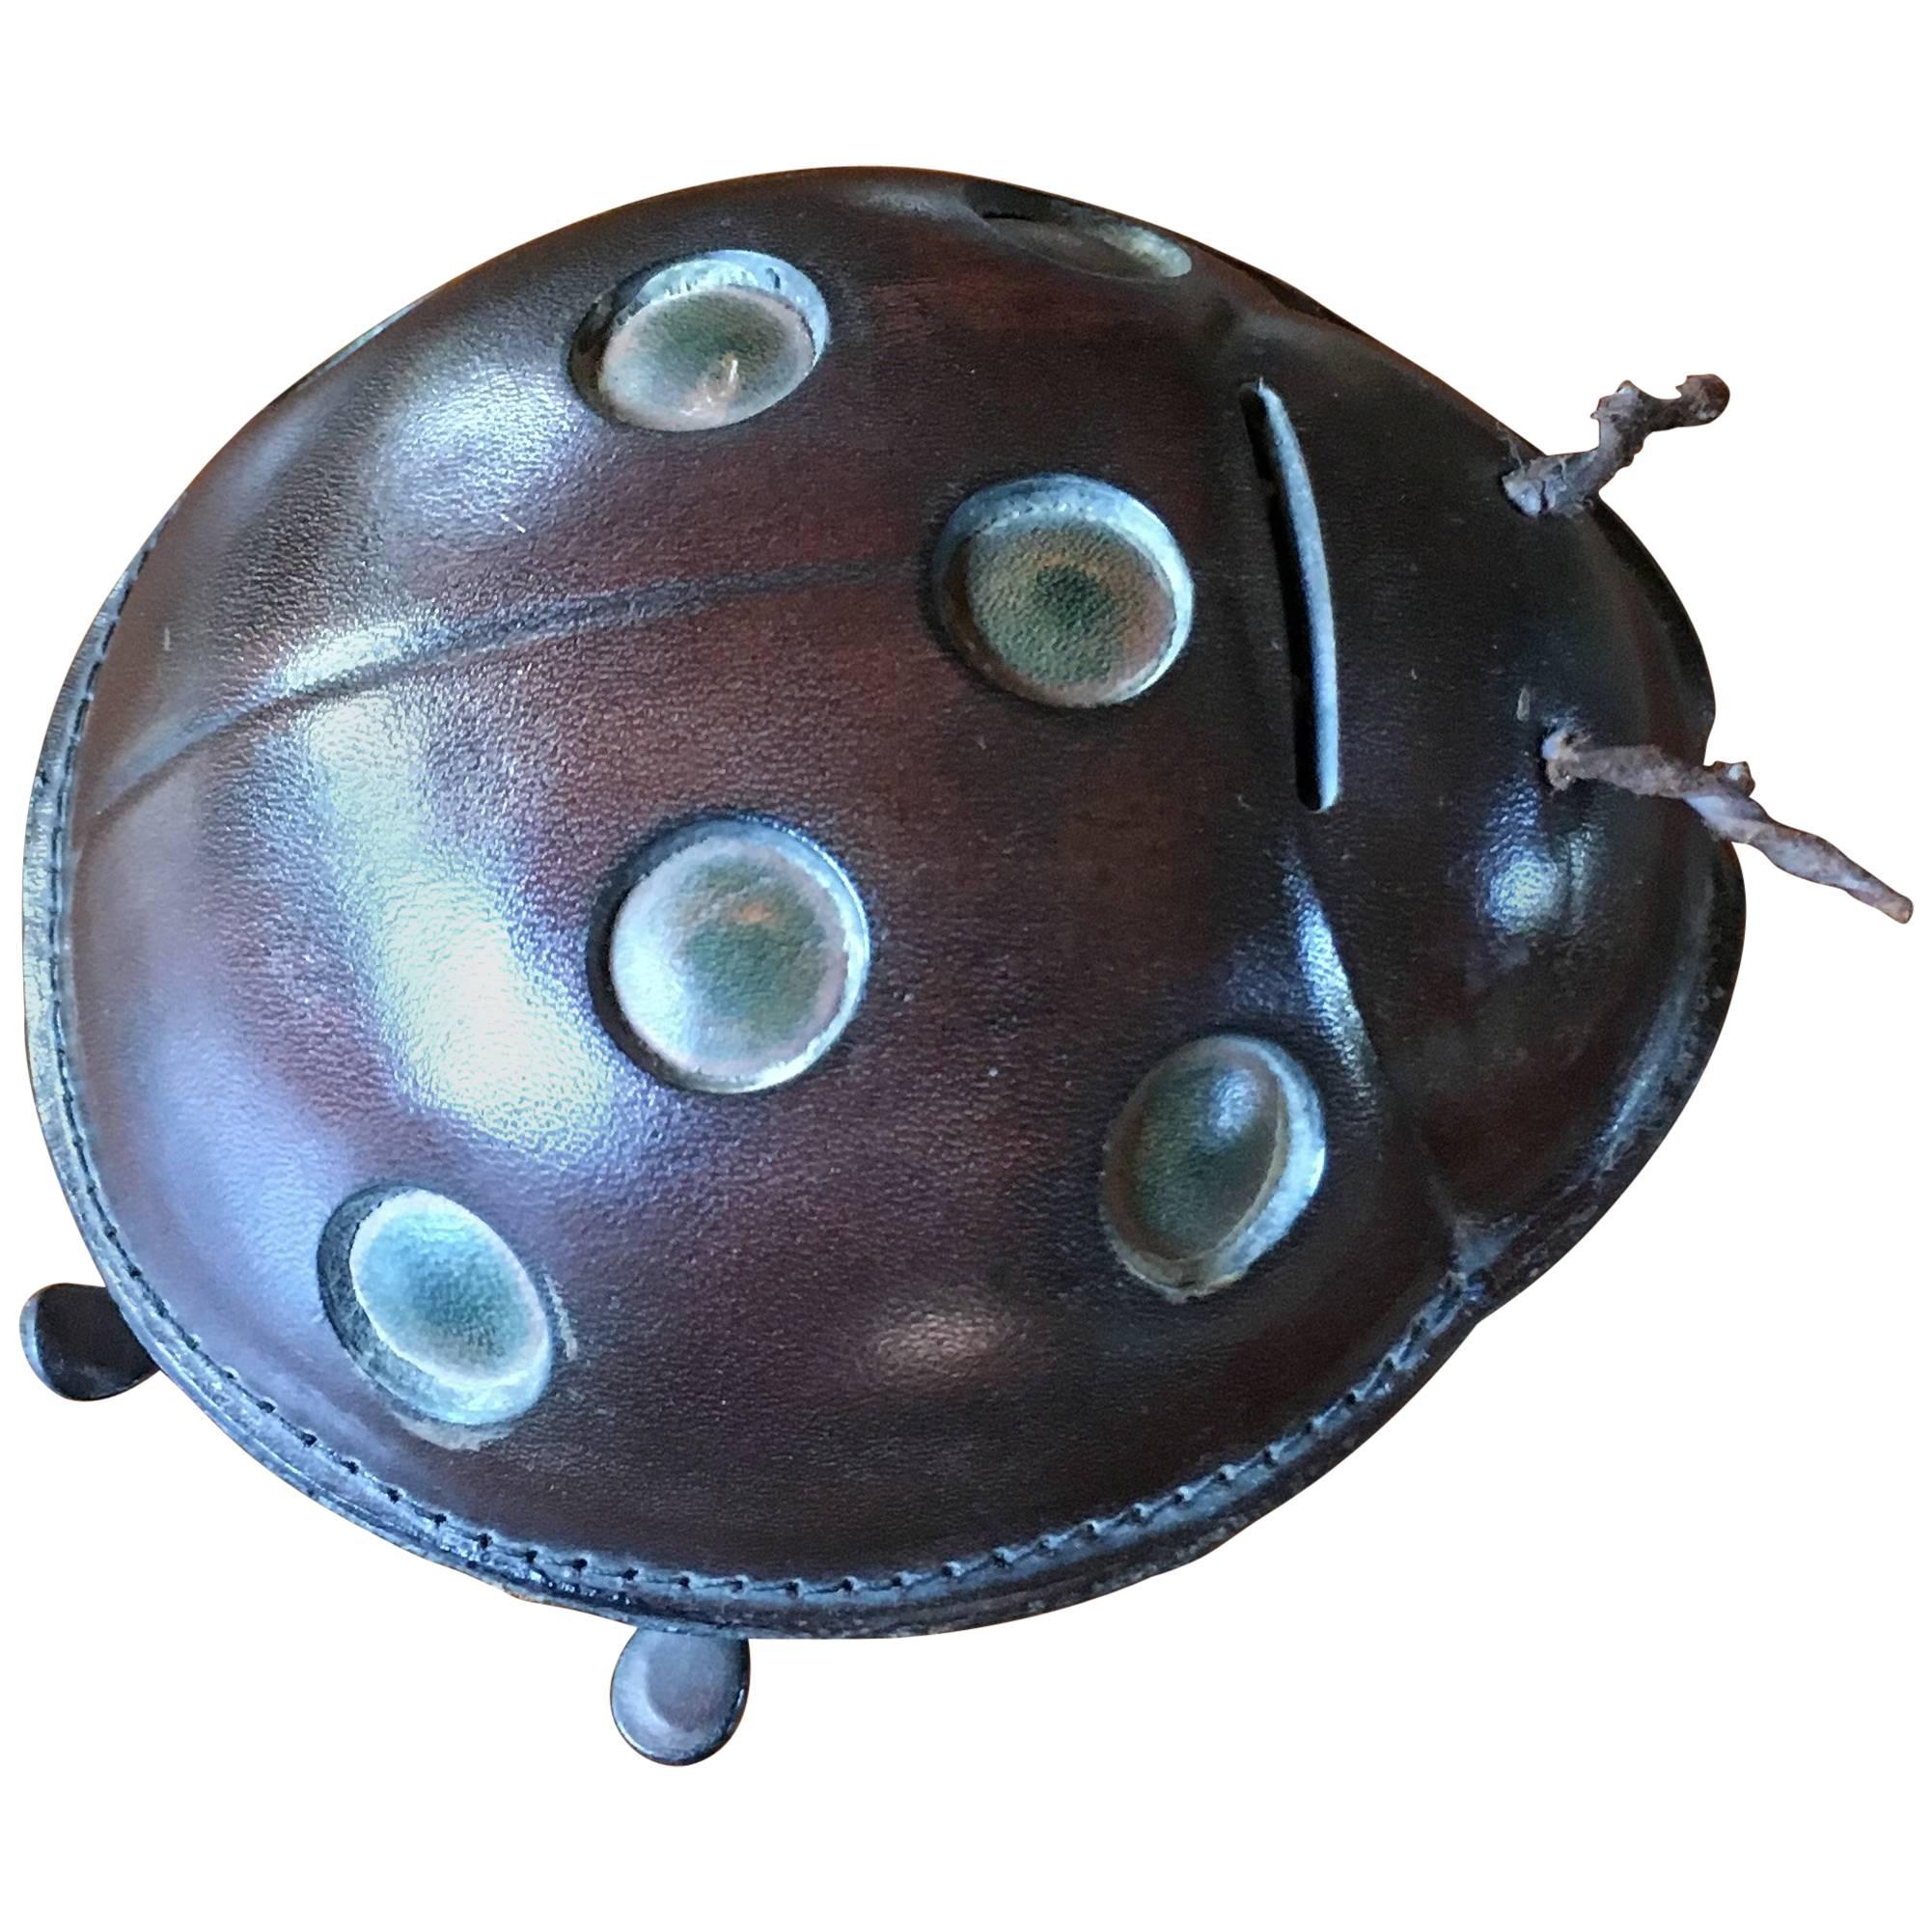 Midcentury Leather "Piggy Bank" Shaped like a Lady Bug, Japan, circa 1960 For Sale